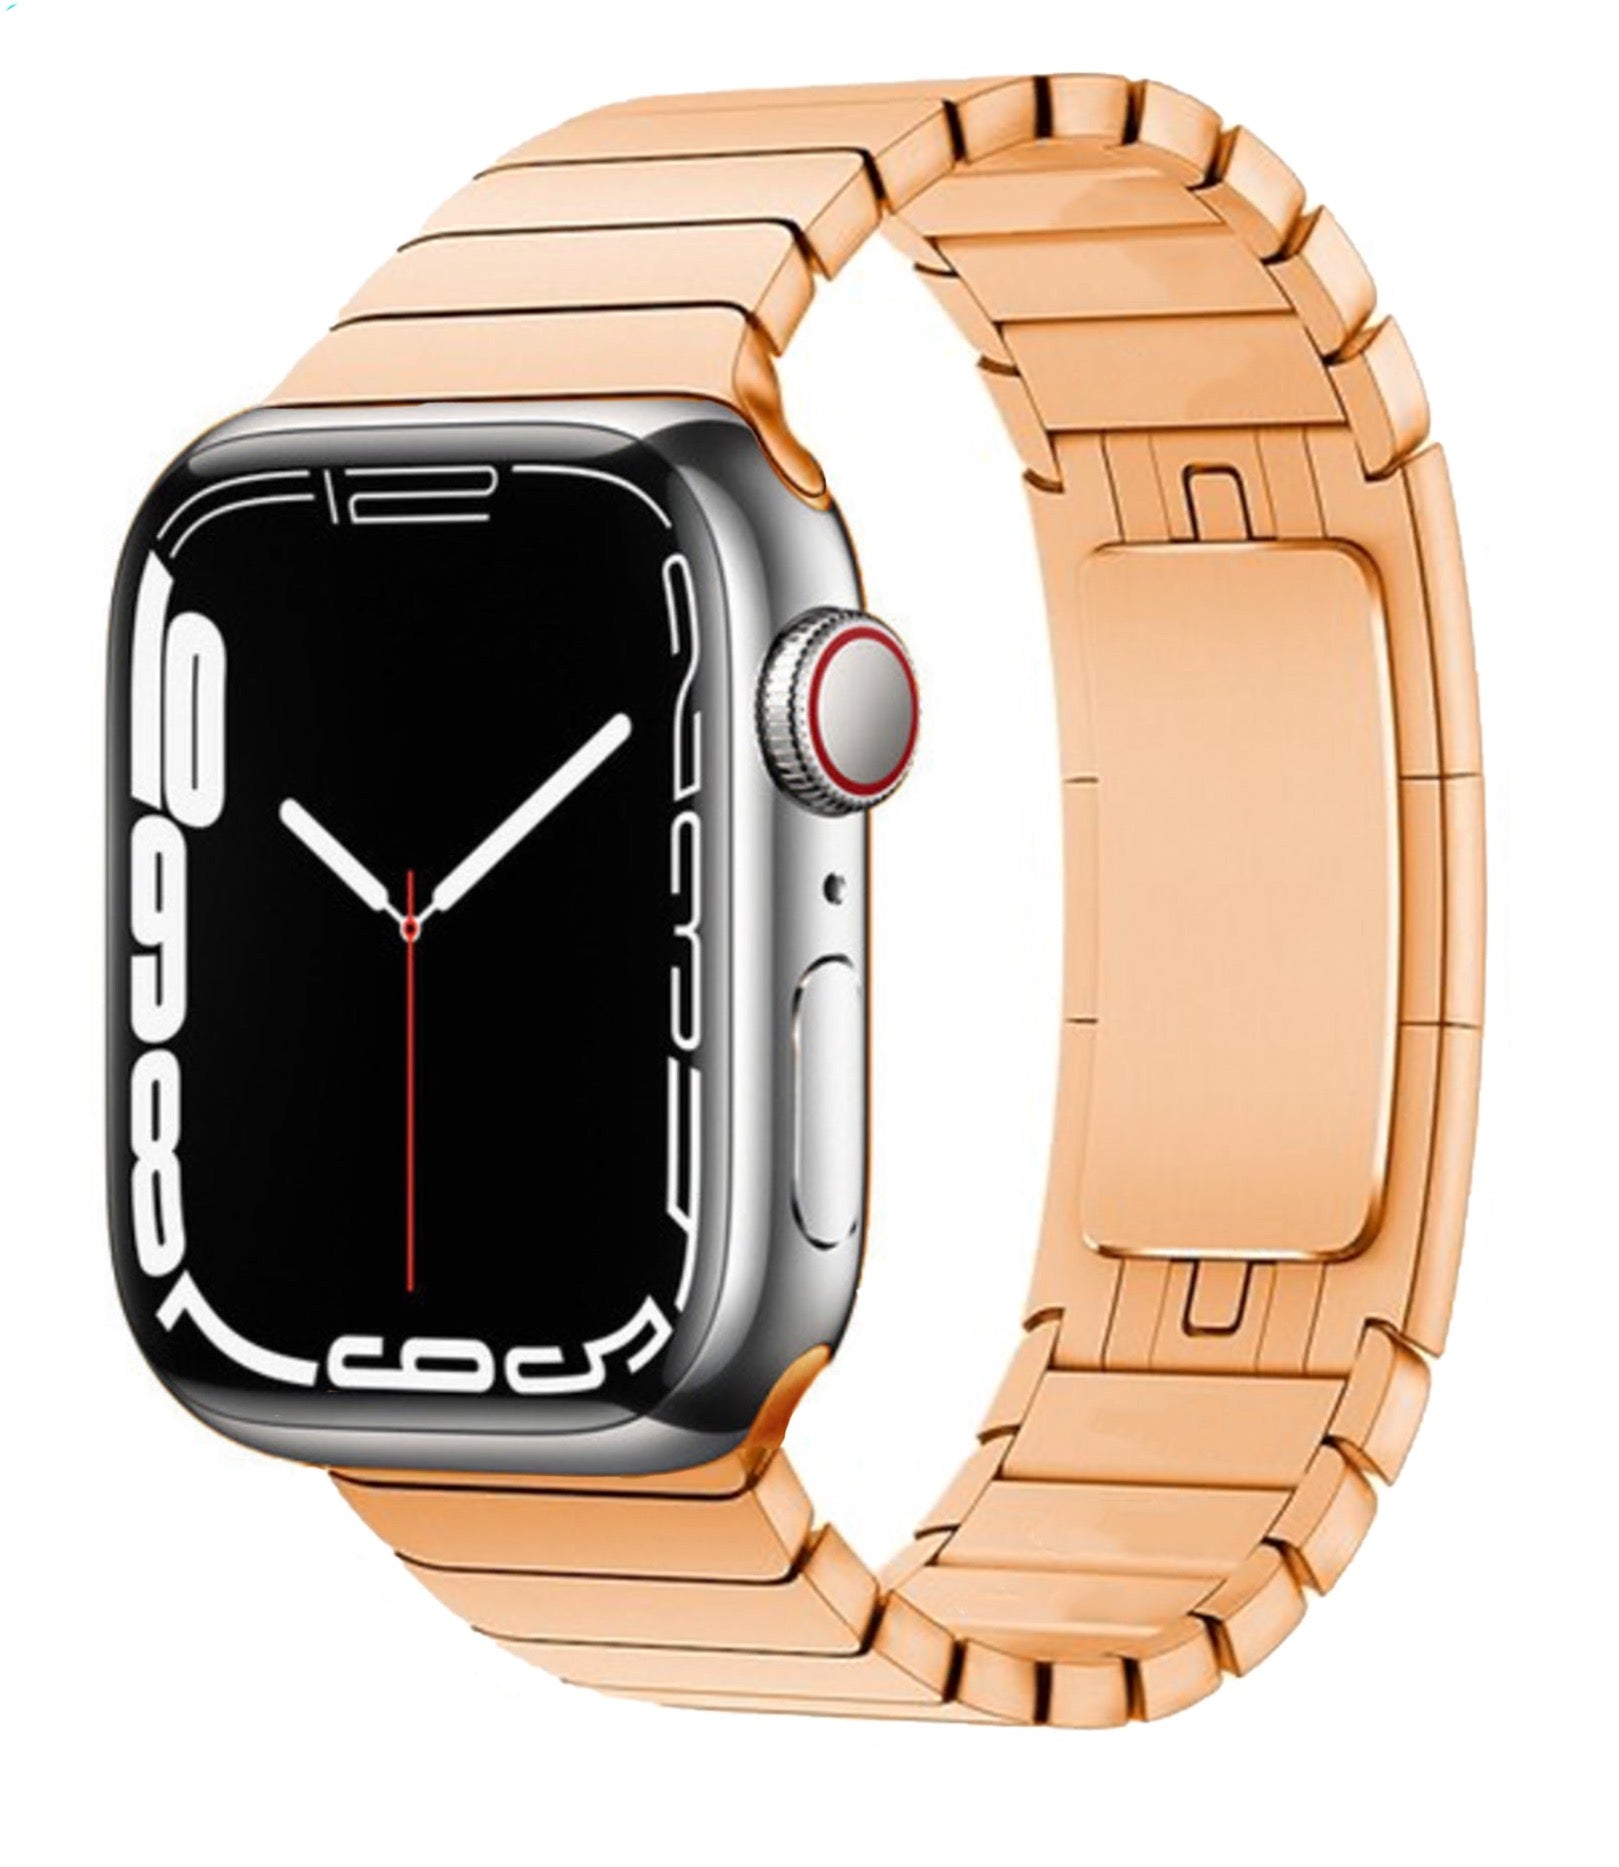 Apple Watch stainless steel - rose